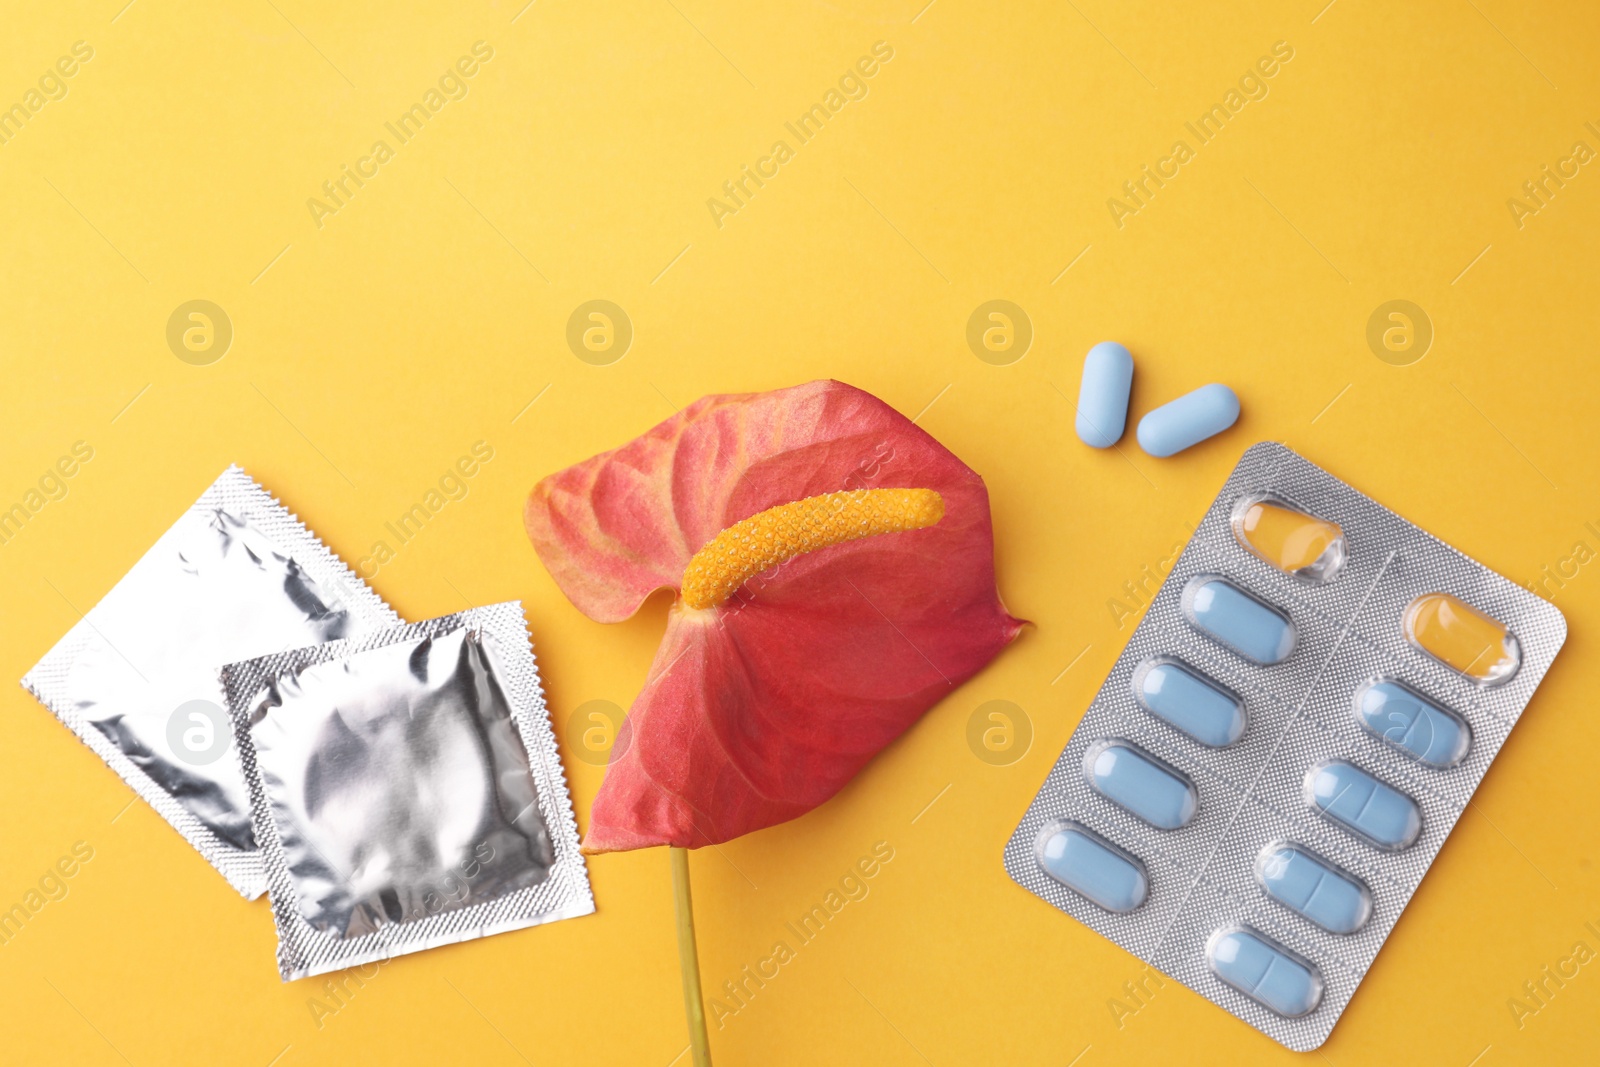 Photo of Anthurium flower symbolizing male sexual organ, pills and condoms on orange background, flat lay. Potency problem